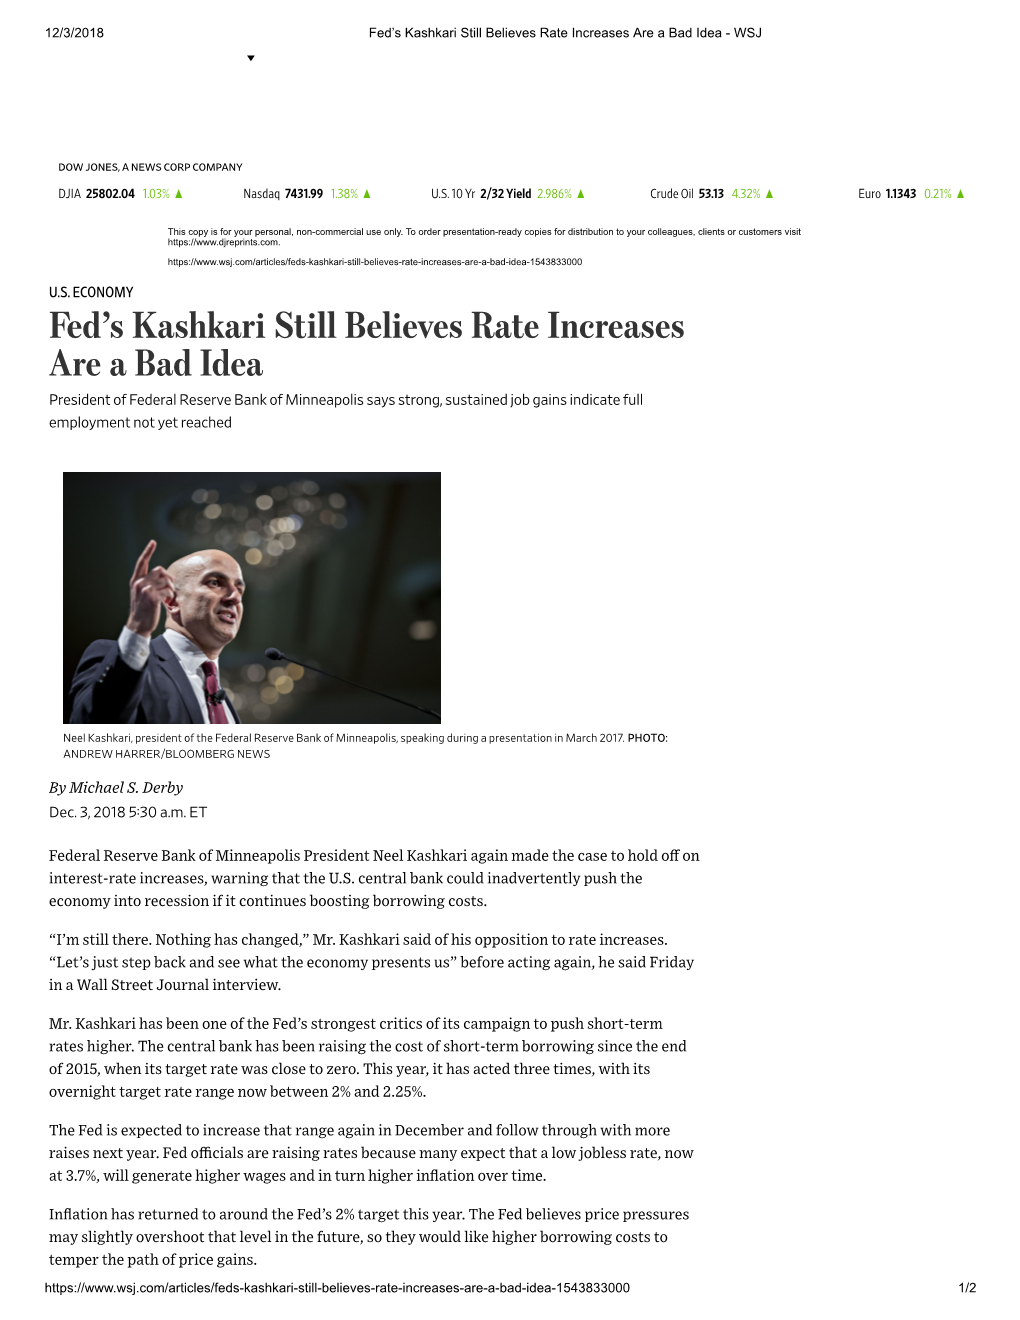 Fed's Kashkari Still Believes Rate Increases Are A